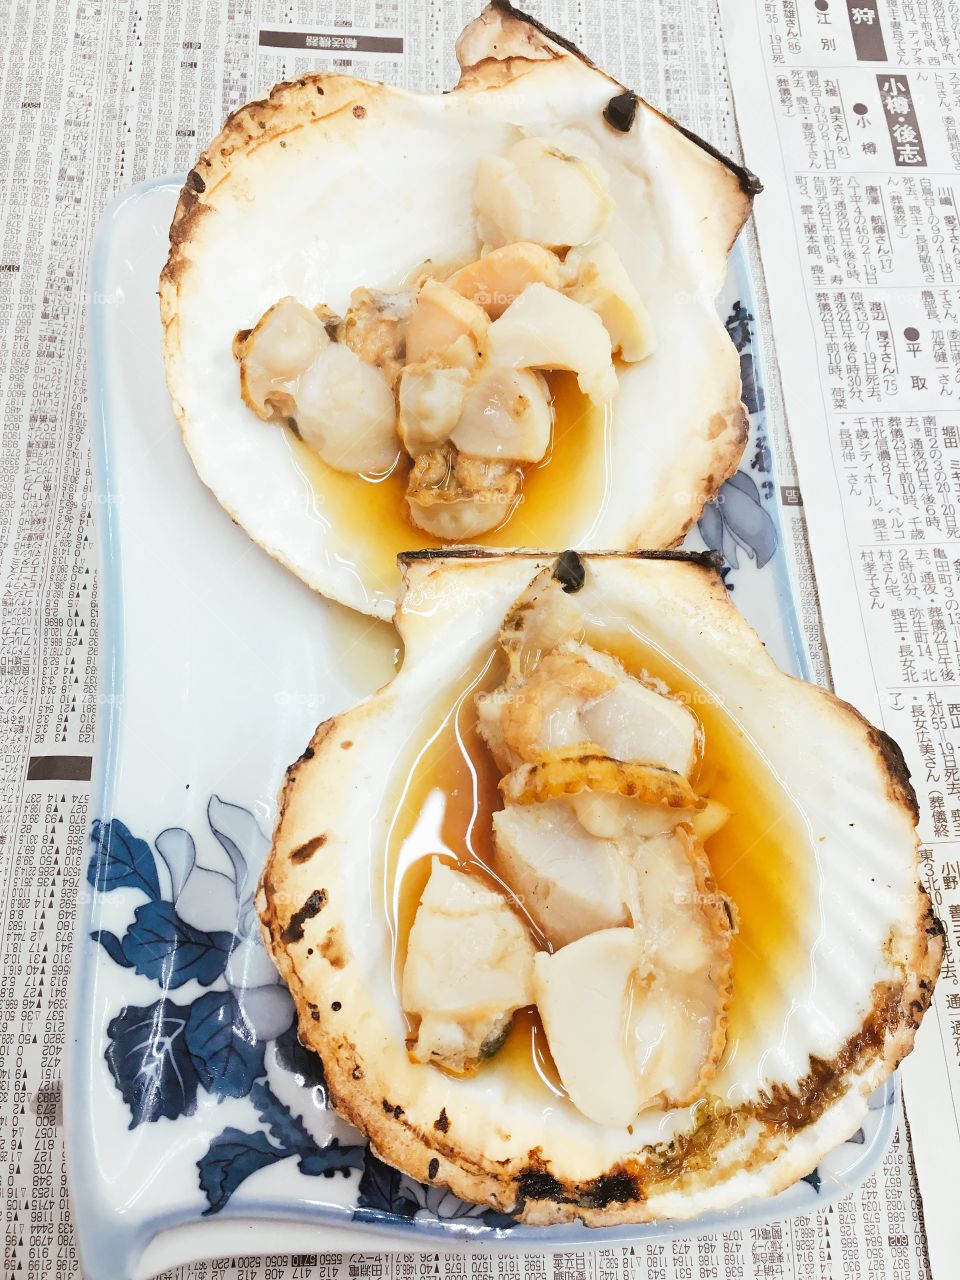 Grilled scallop in the shell on tray